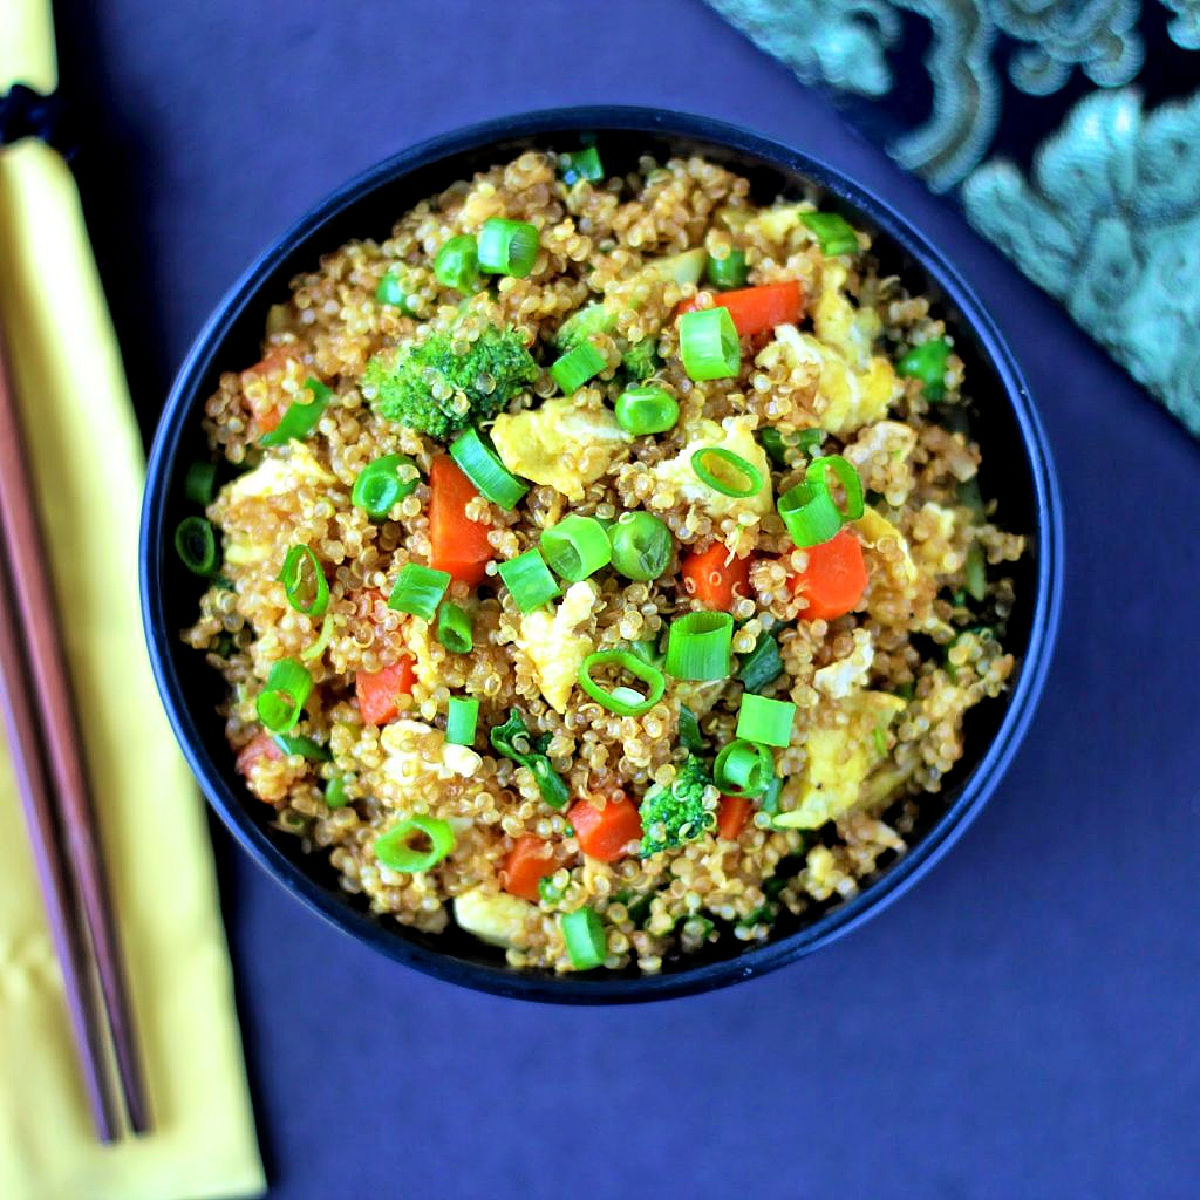 Quinoa fried rice in a black bowl with chopsticks and a yellow napkin nearby.